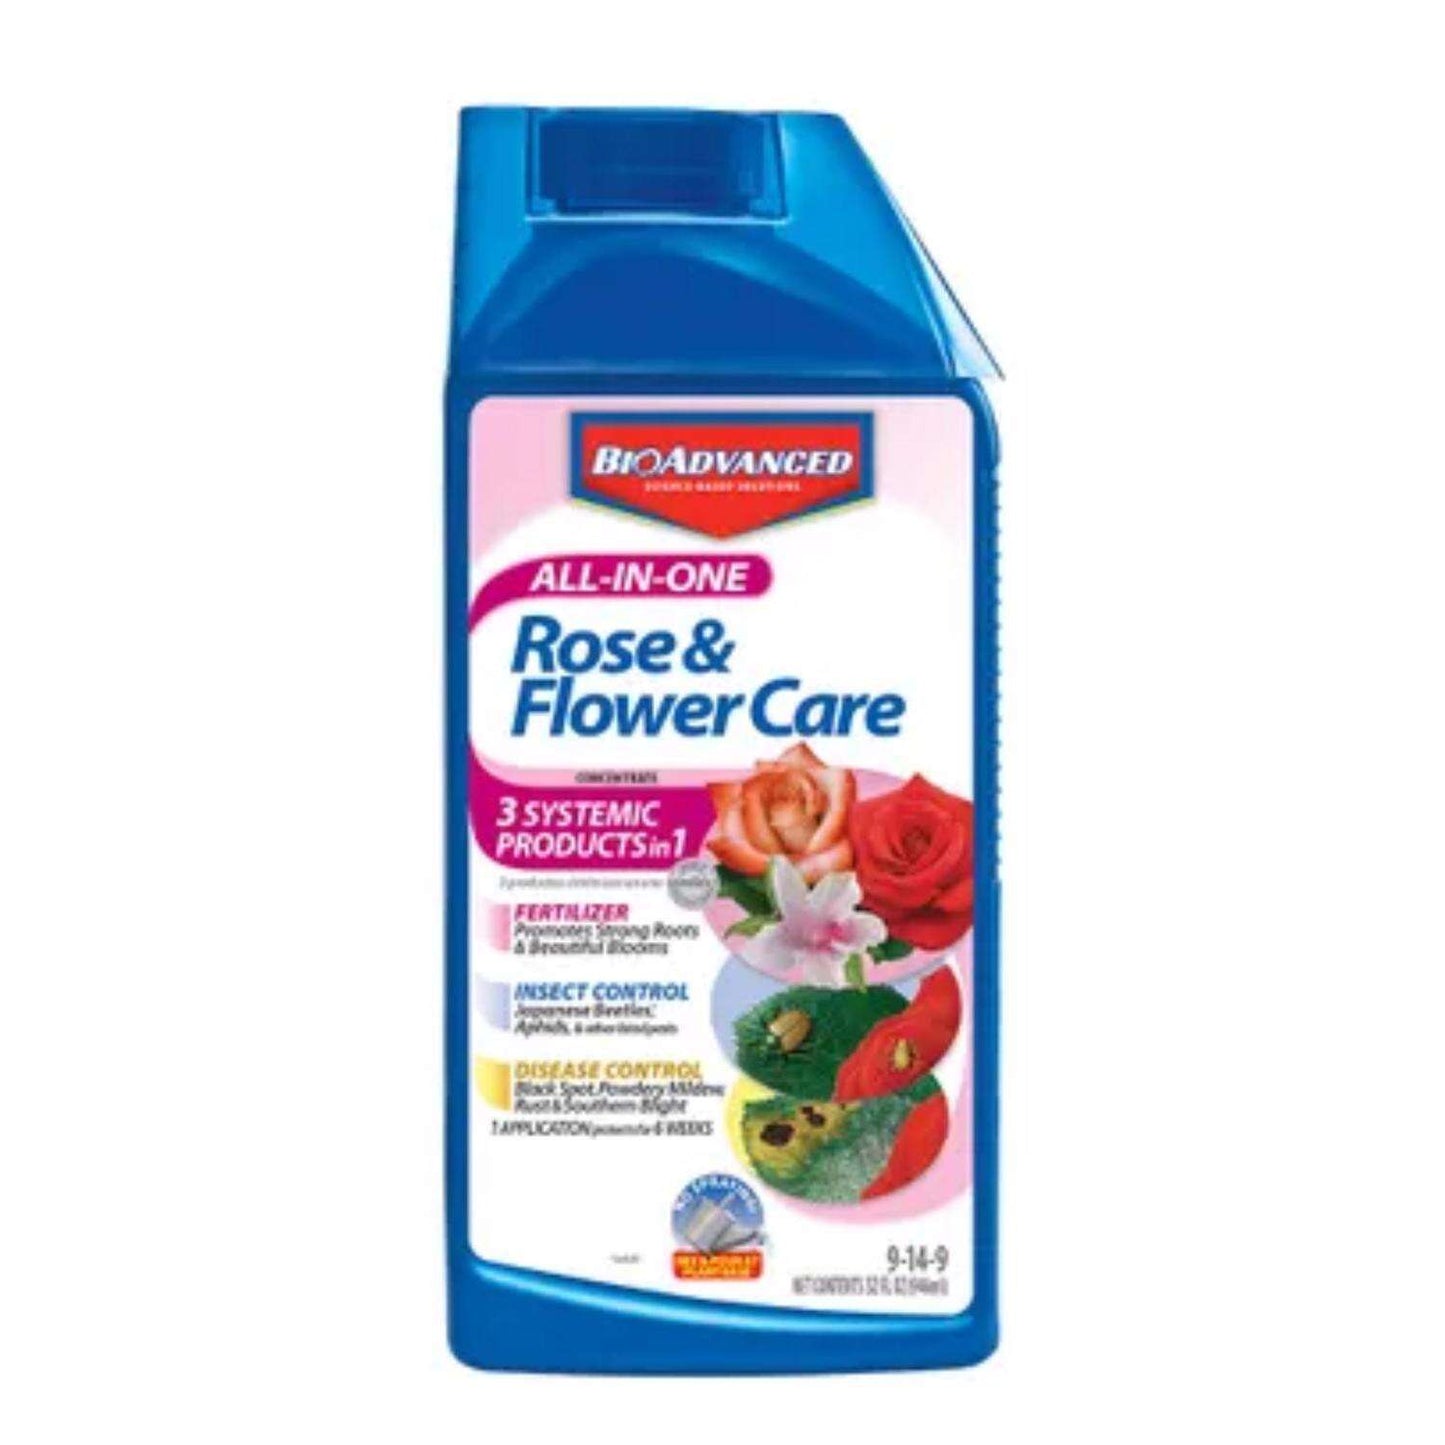 BioAdvanced Rose & Flower Care All in One 32 Oz wallacegardencenter